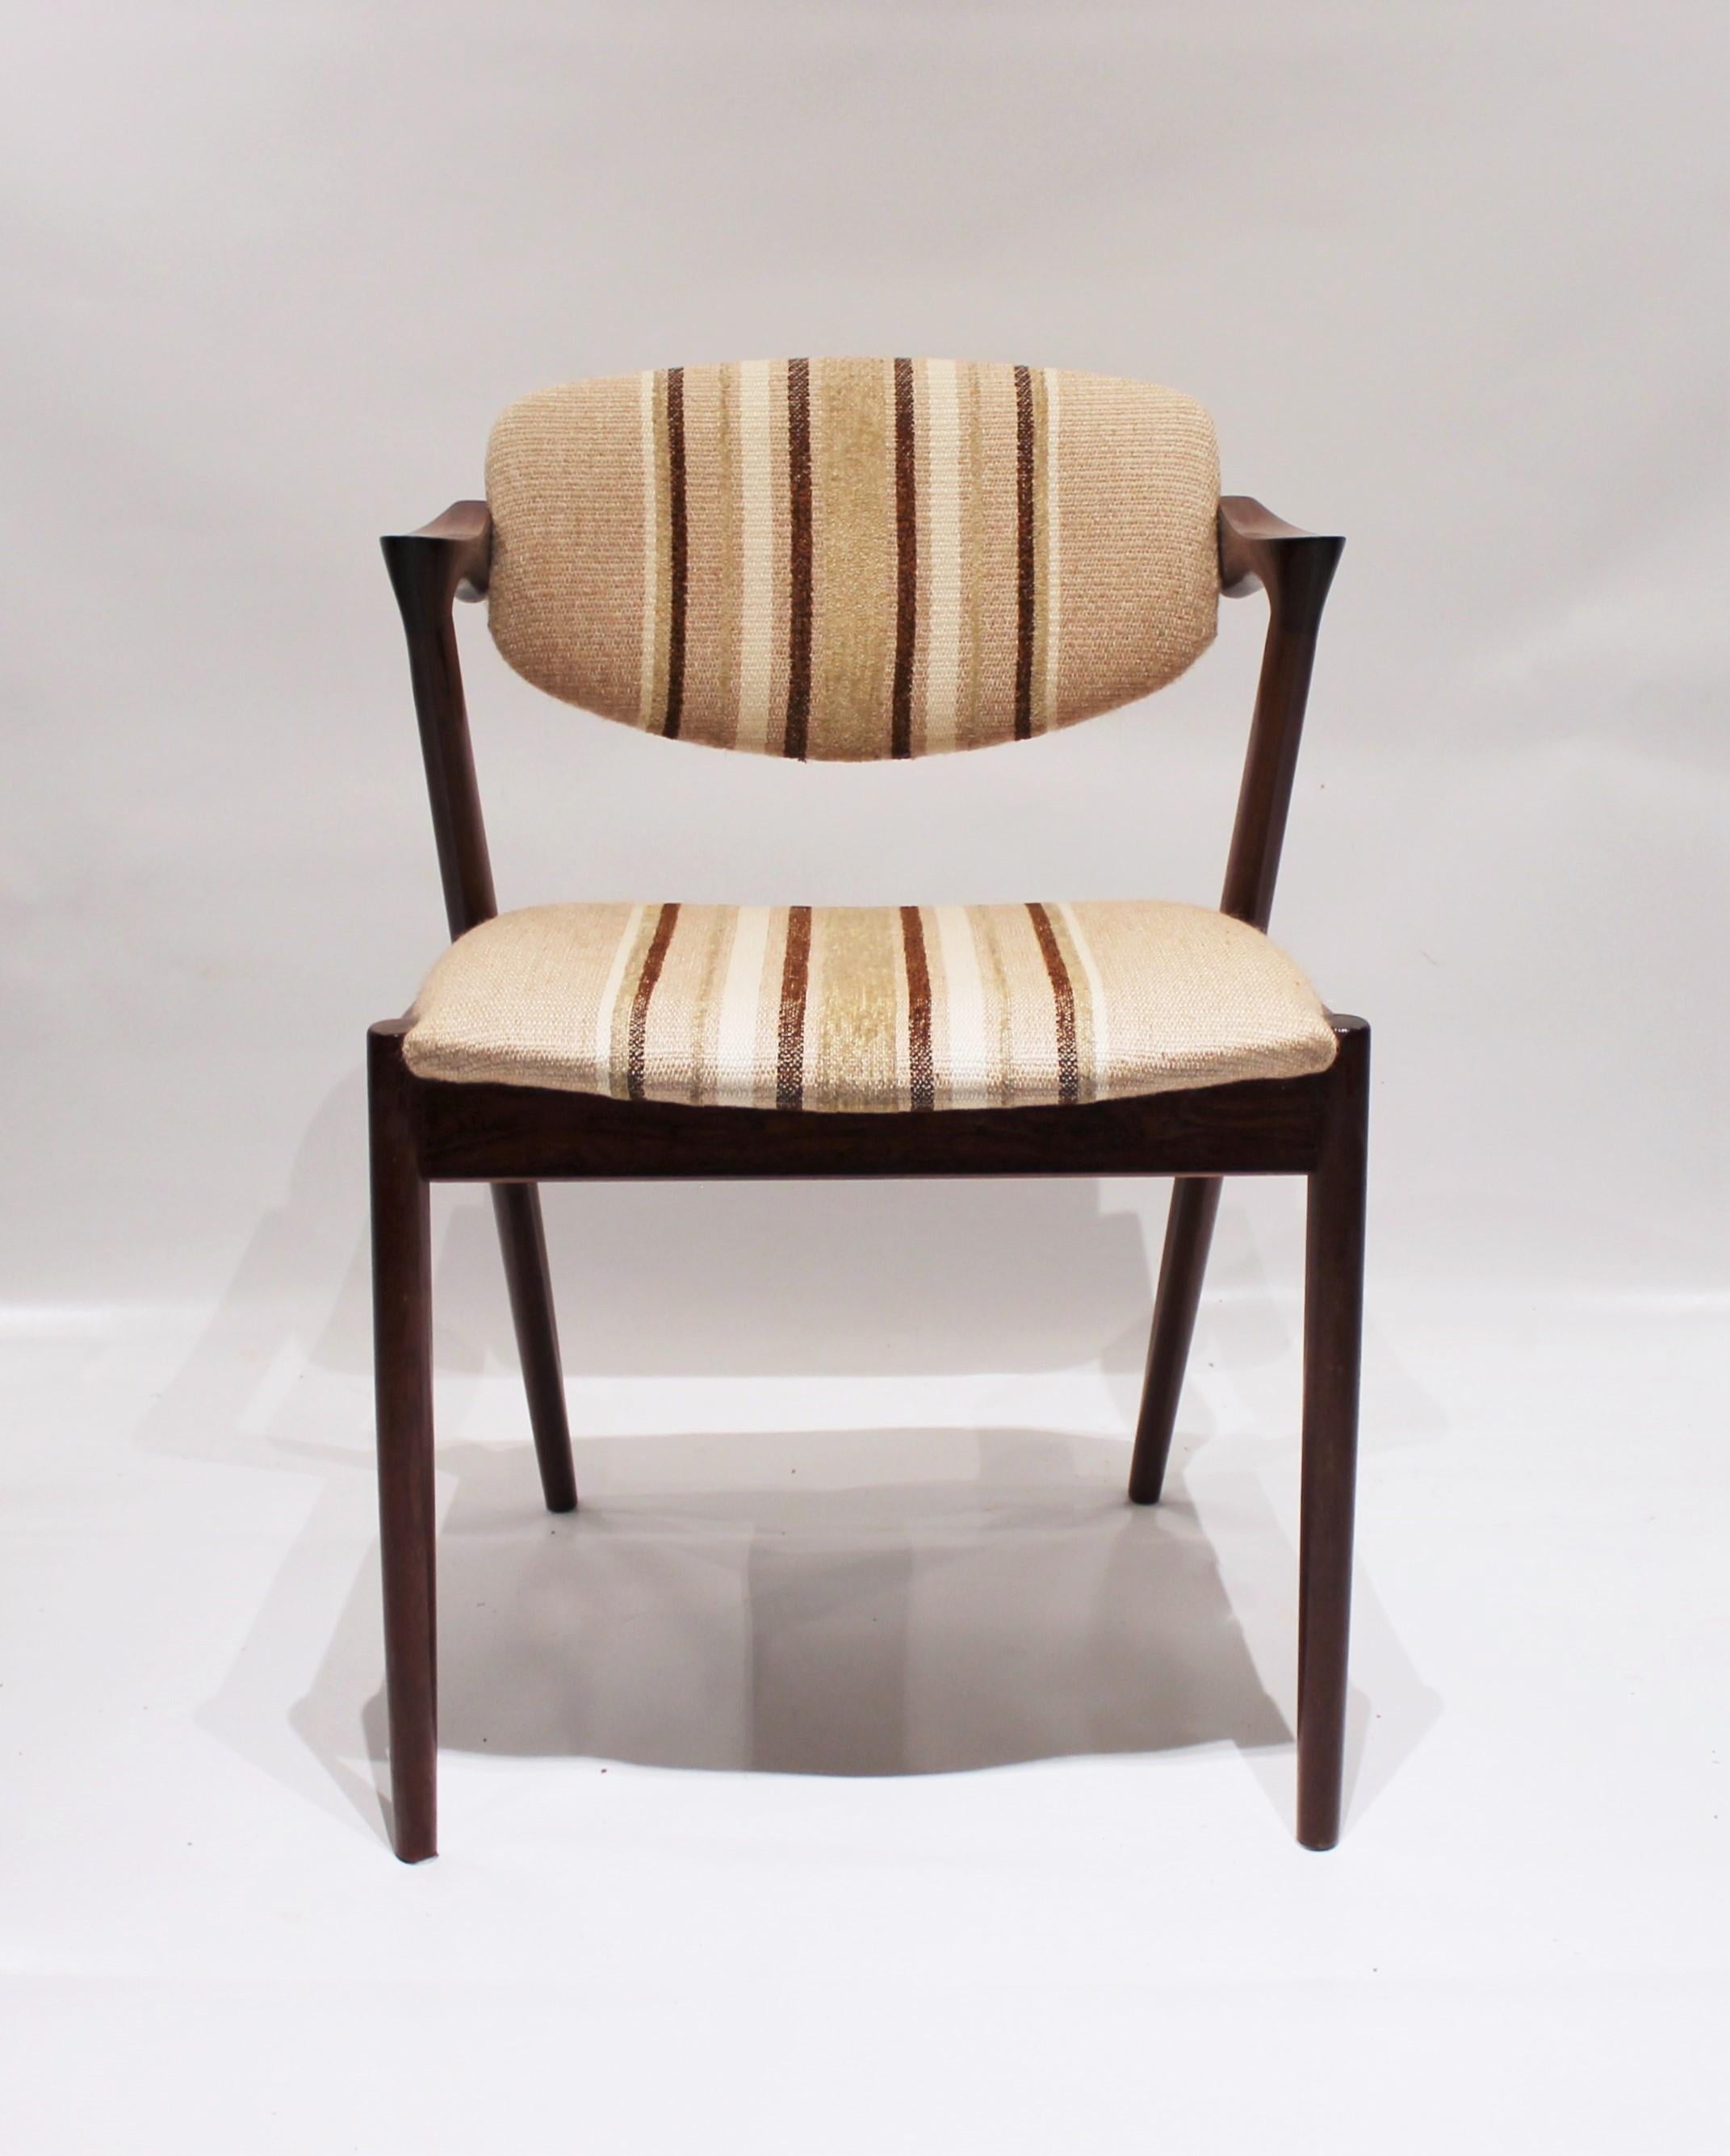 A set of 6 dining chairs, model 42, designed by Kai Kristiansen and manufactured by Schou Andersen in the 1960s. The chairs are of rosewood and upholstered in light striped wool fabric. They are also in great vintage condition.